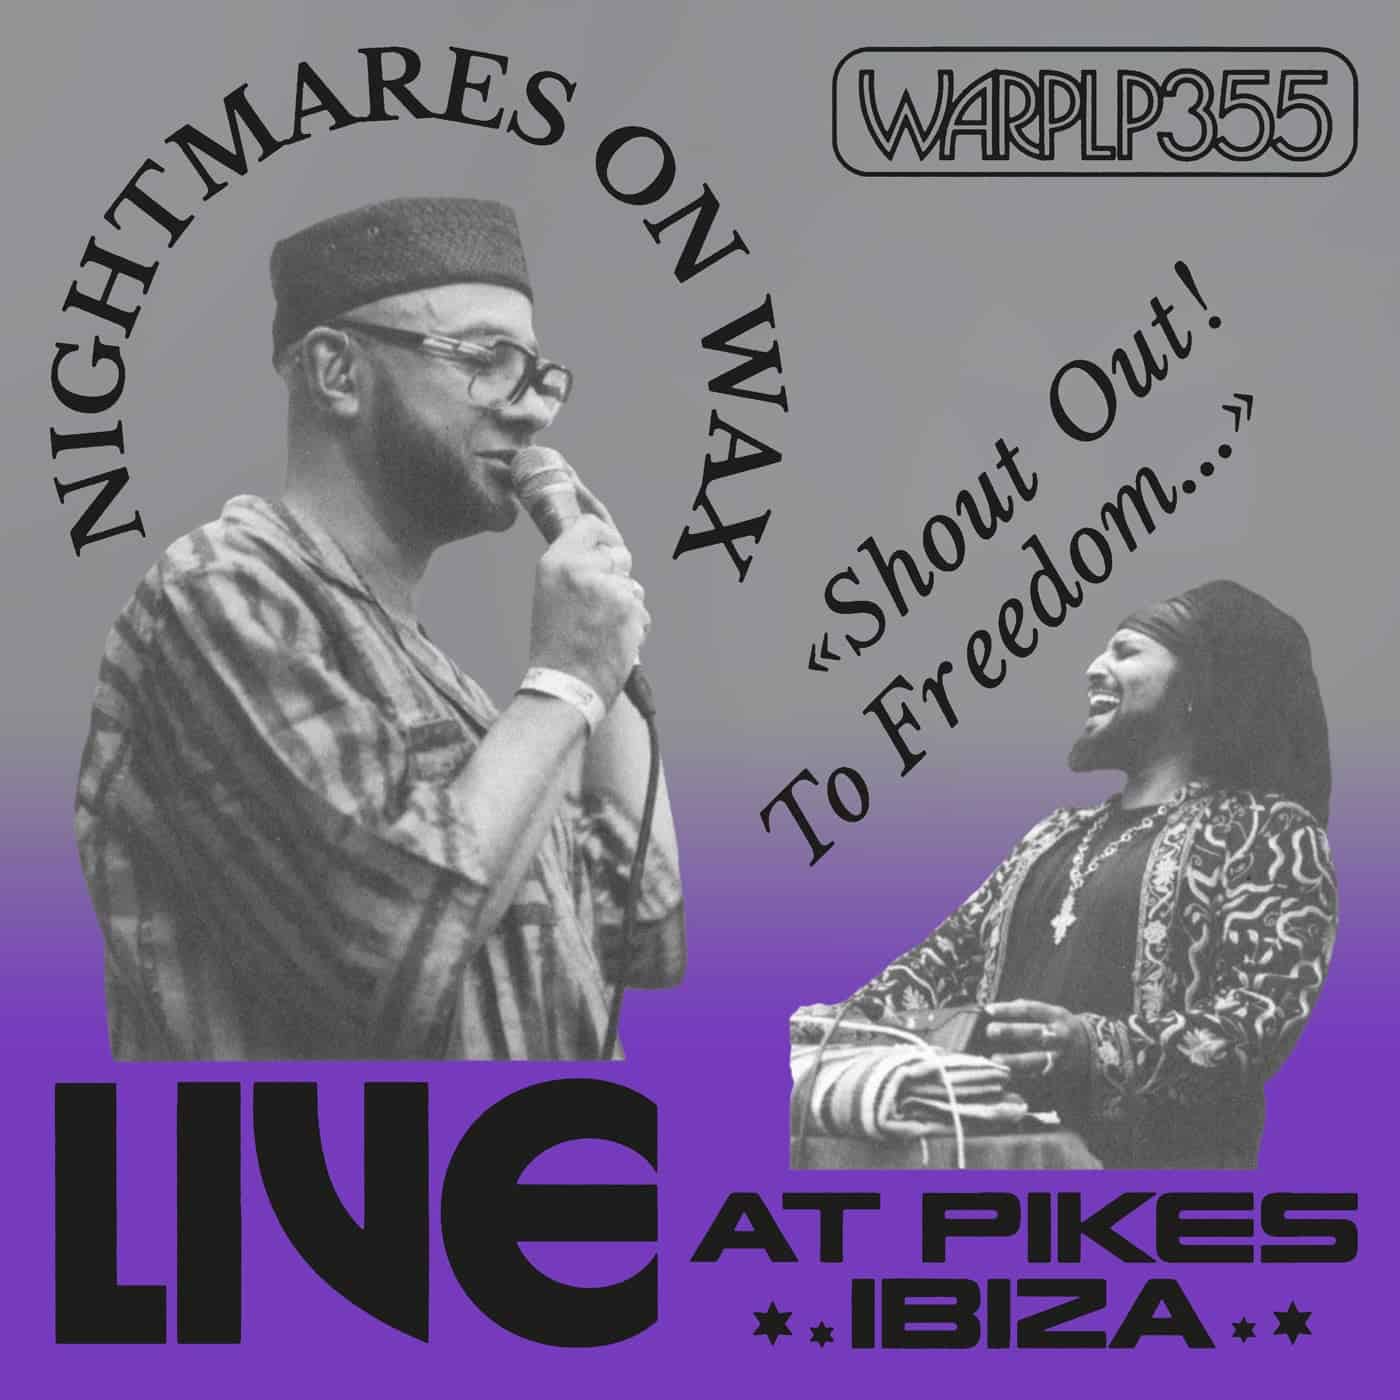 image cover: Nightmares On Wax - Shout Out! To Freedom… / WARPDD355